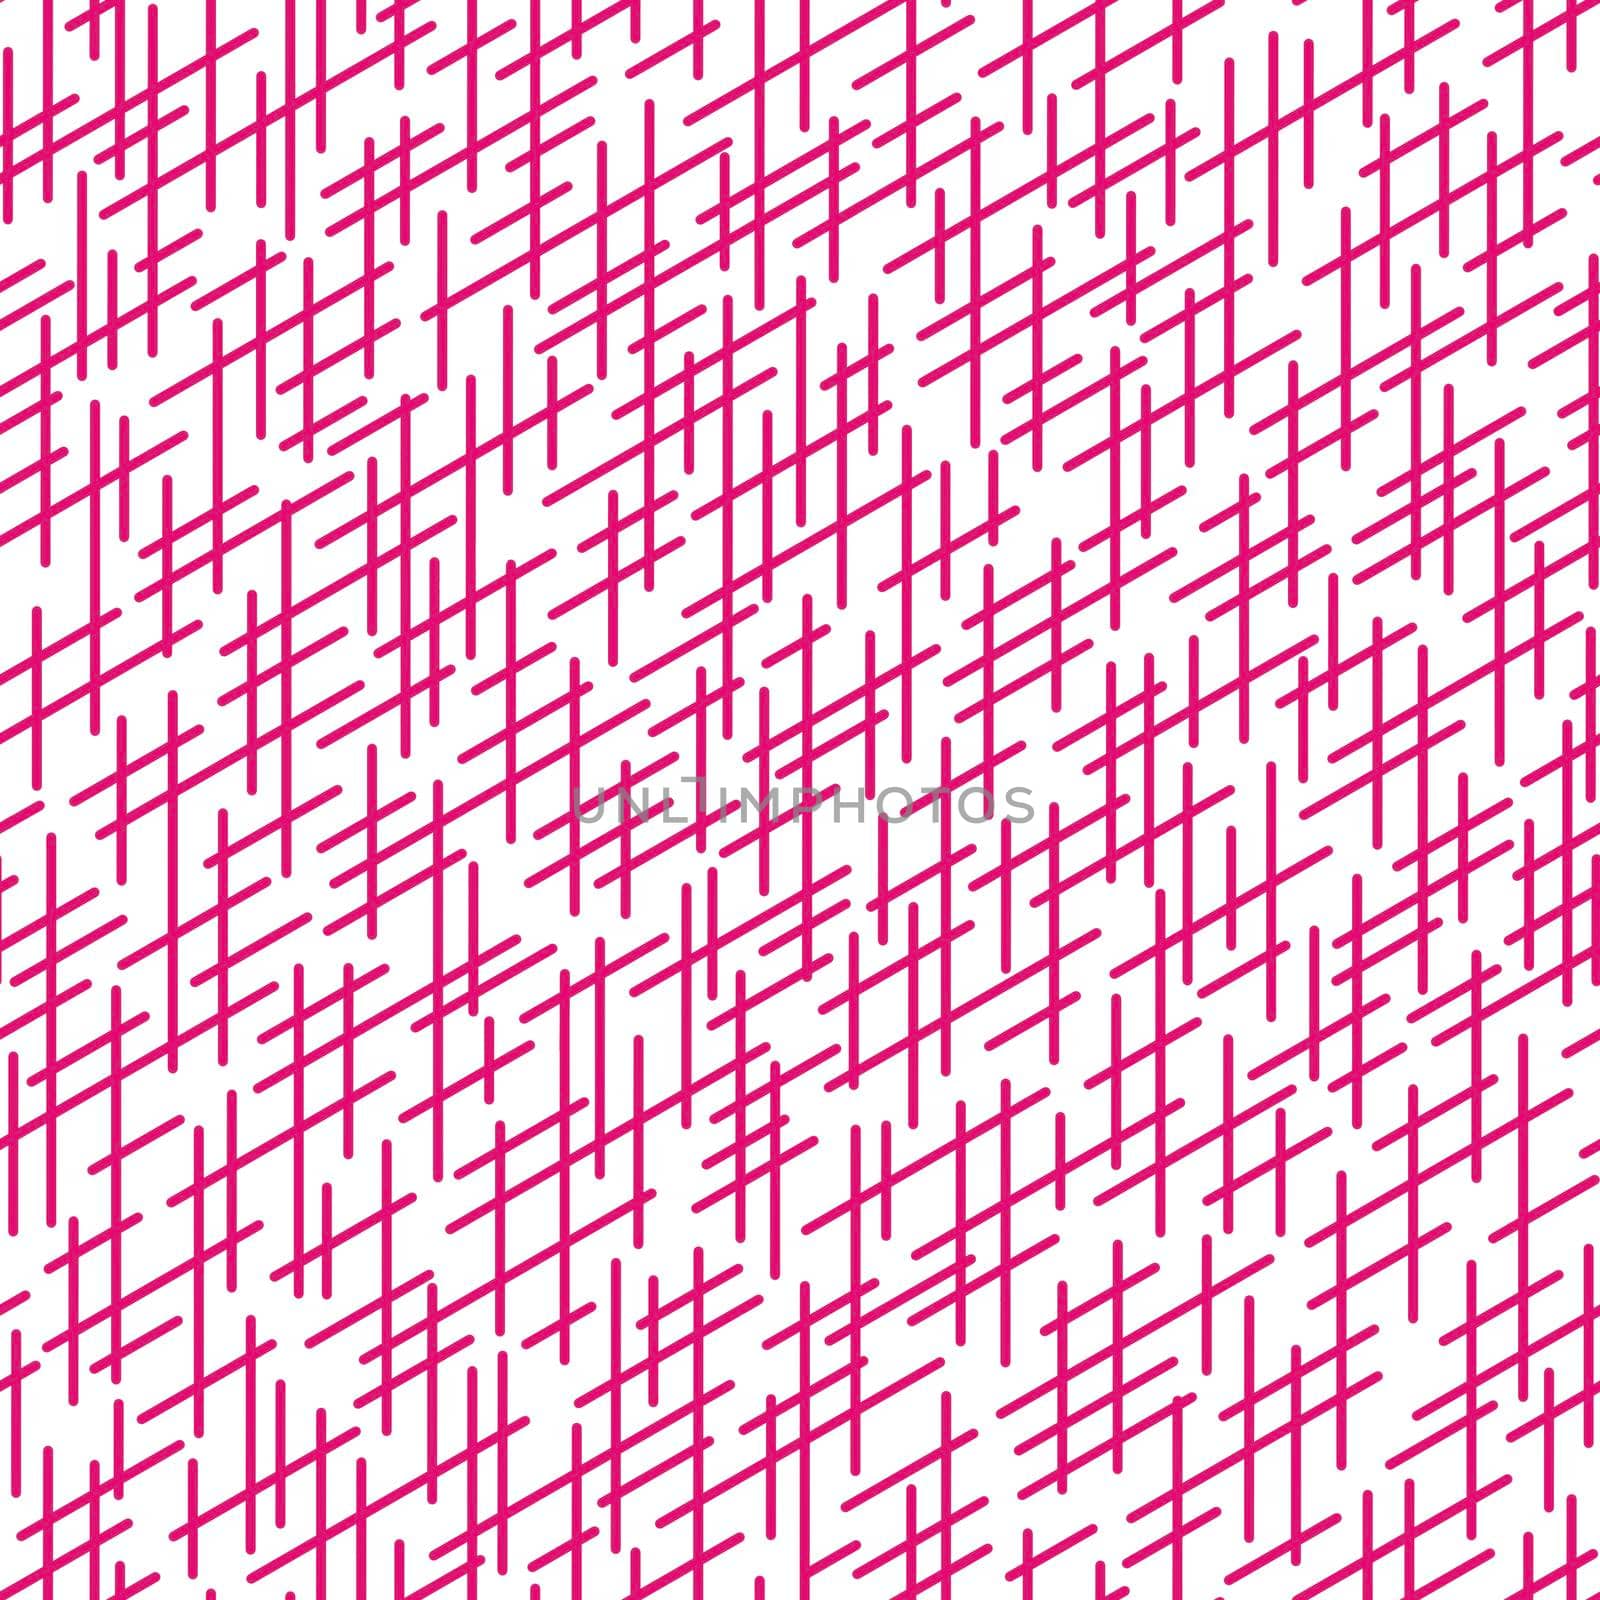 Randomly crossing lines making pattern.Chaotic short lines seamless pattern,chips and sticks modern repeatable motif.Good for print, textile,fabric, background, wrapping paper.Pink white colors by Angelsmoon